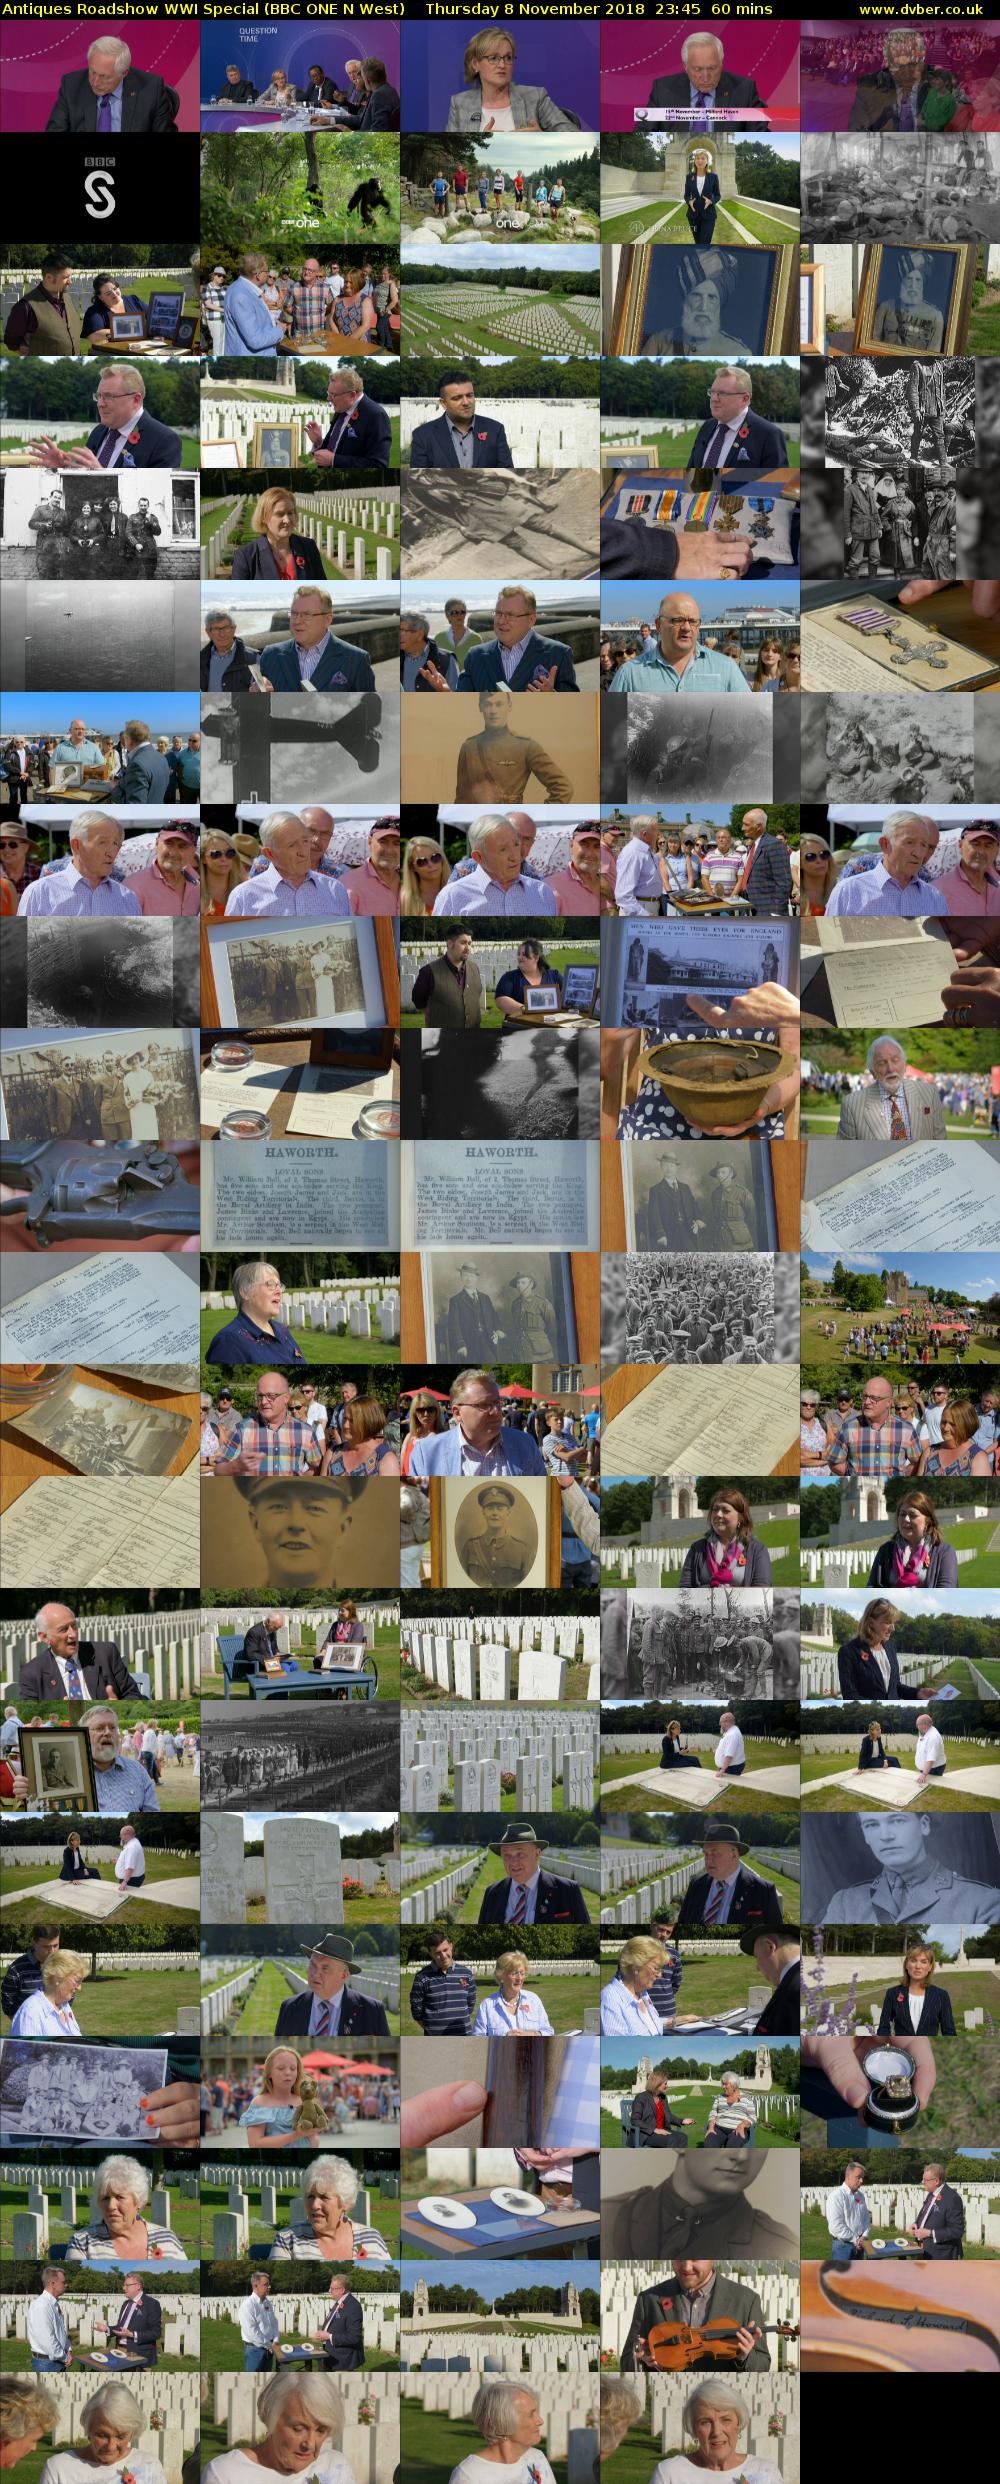 Antiques Roadshow WWI Special (BBC ONE N West) Thursday 8 November 2018 23:45 - 00:45